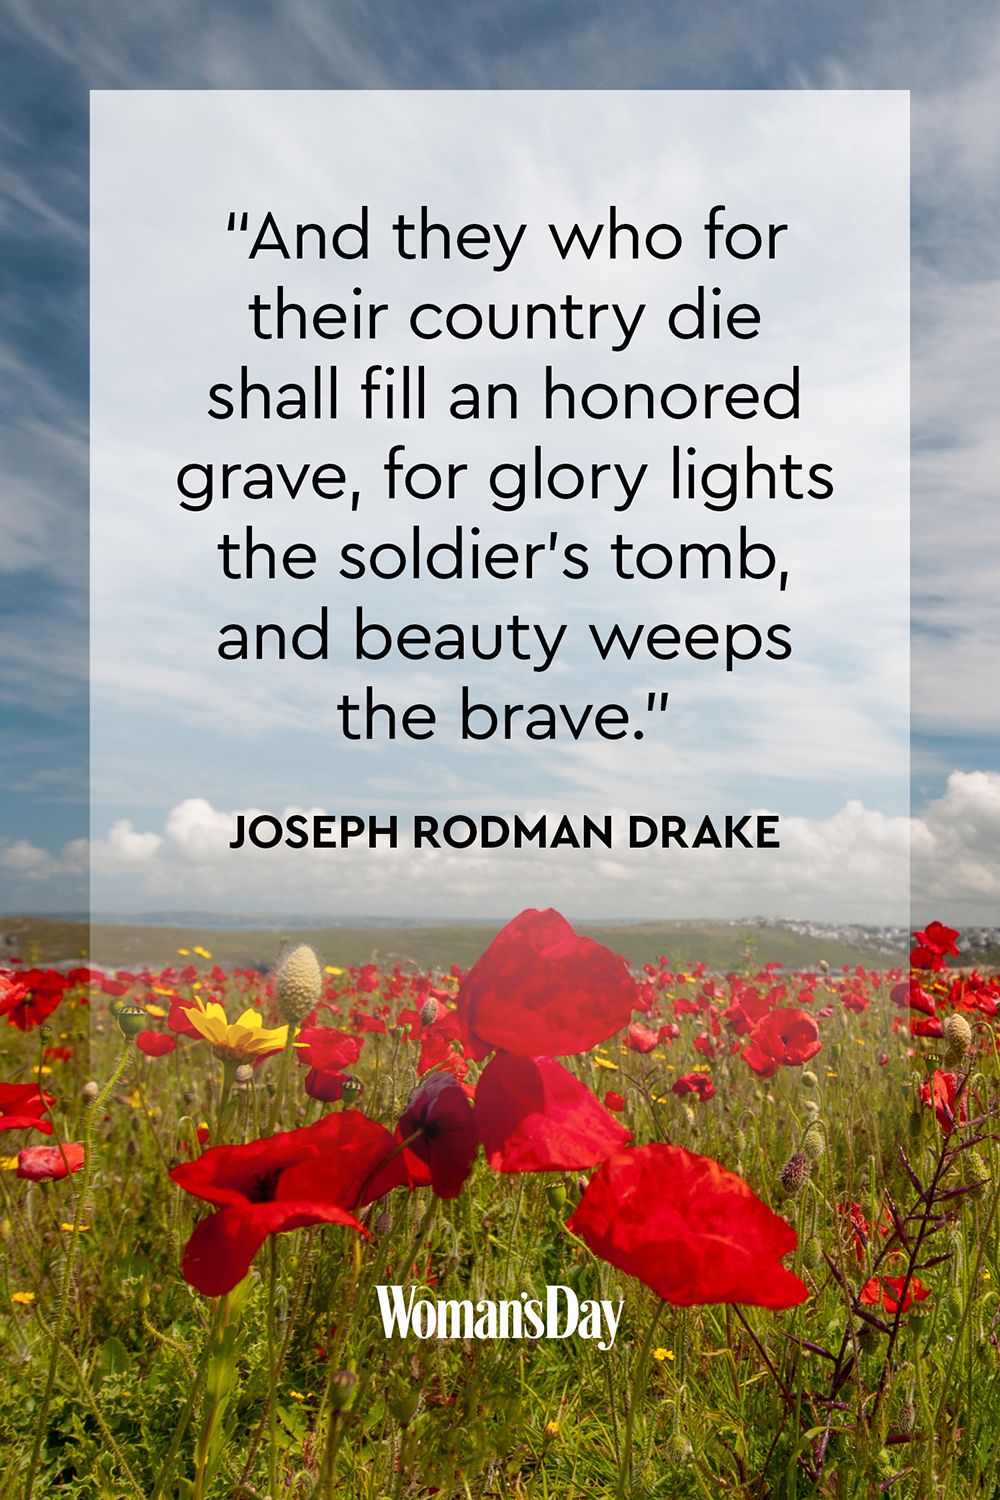 remembrance quotes and poems